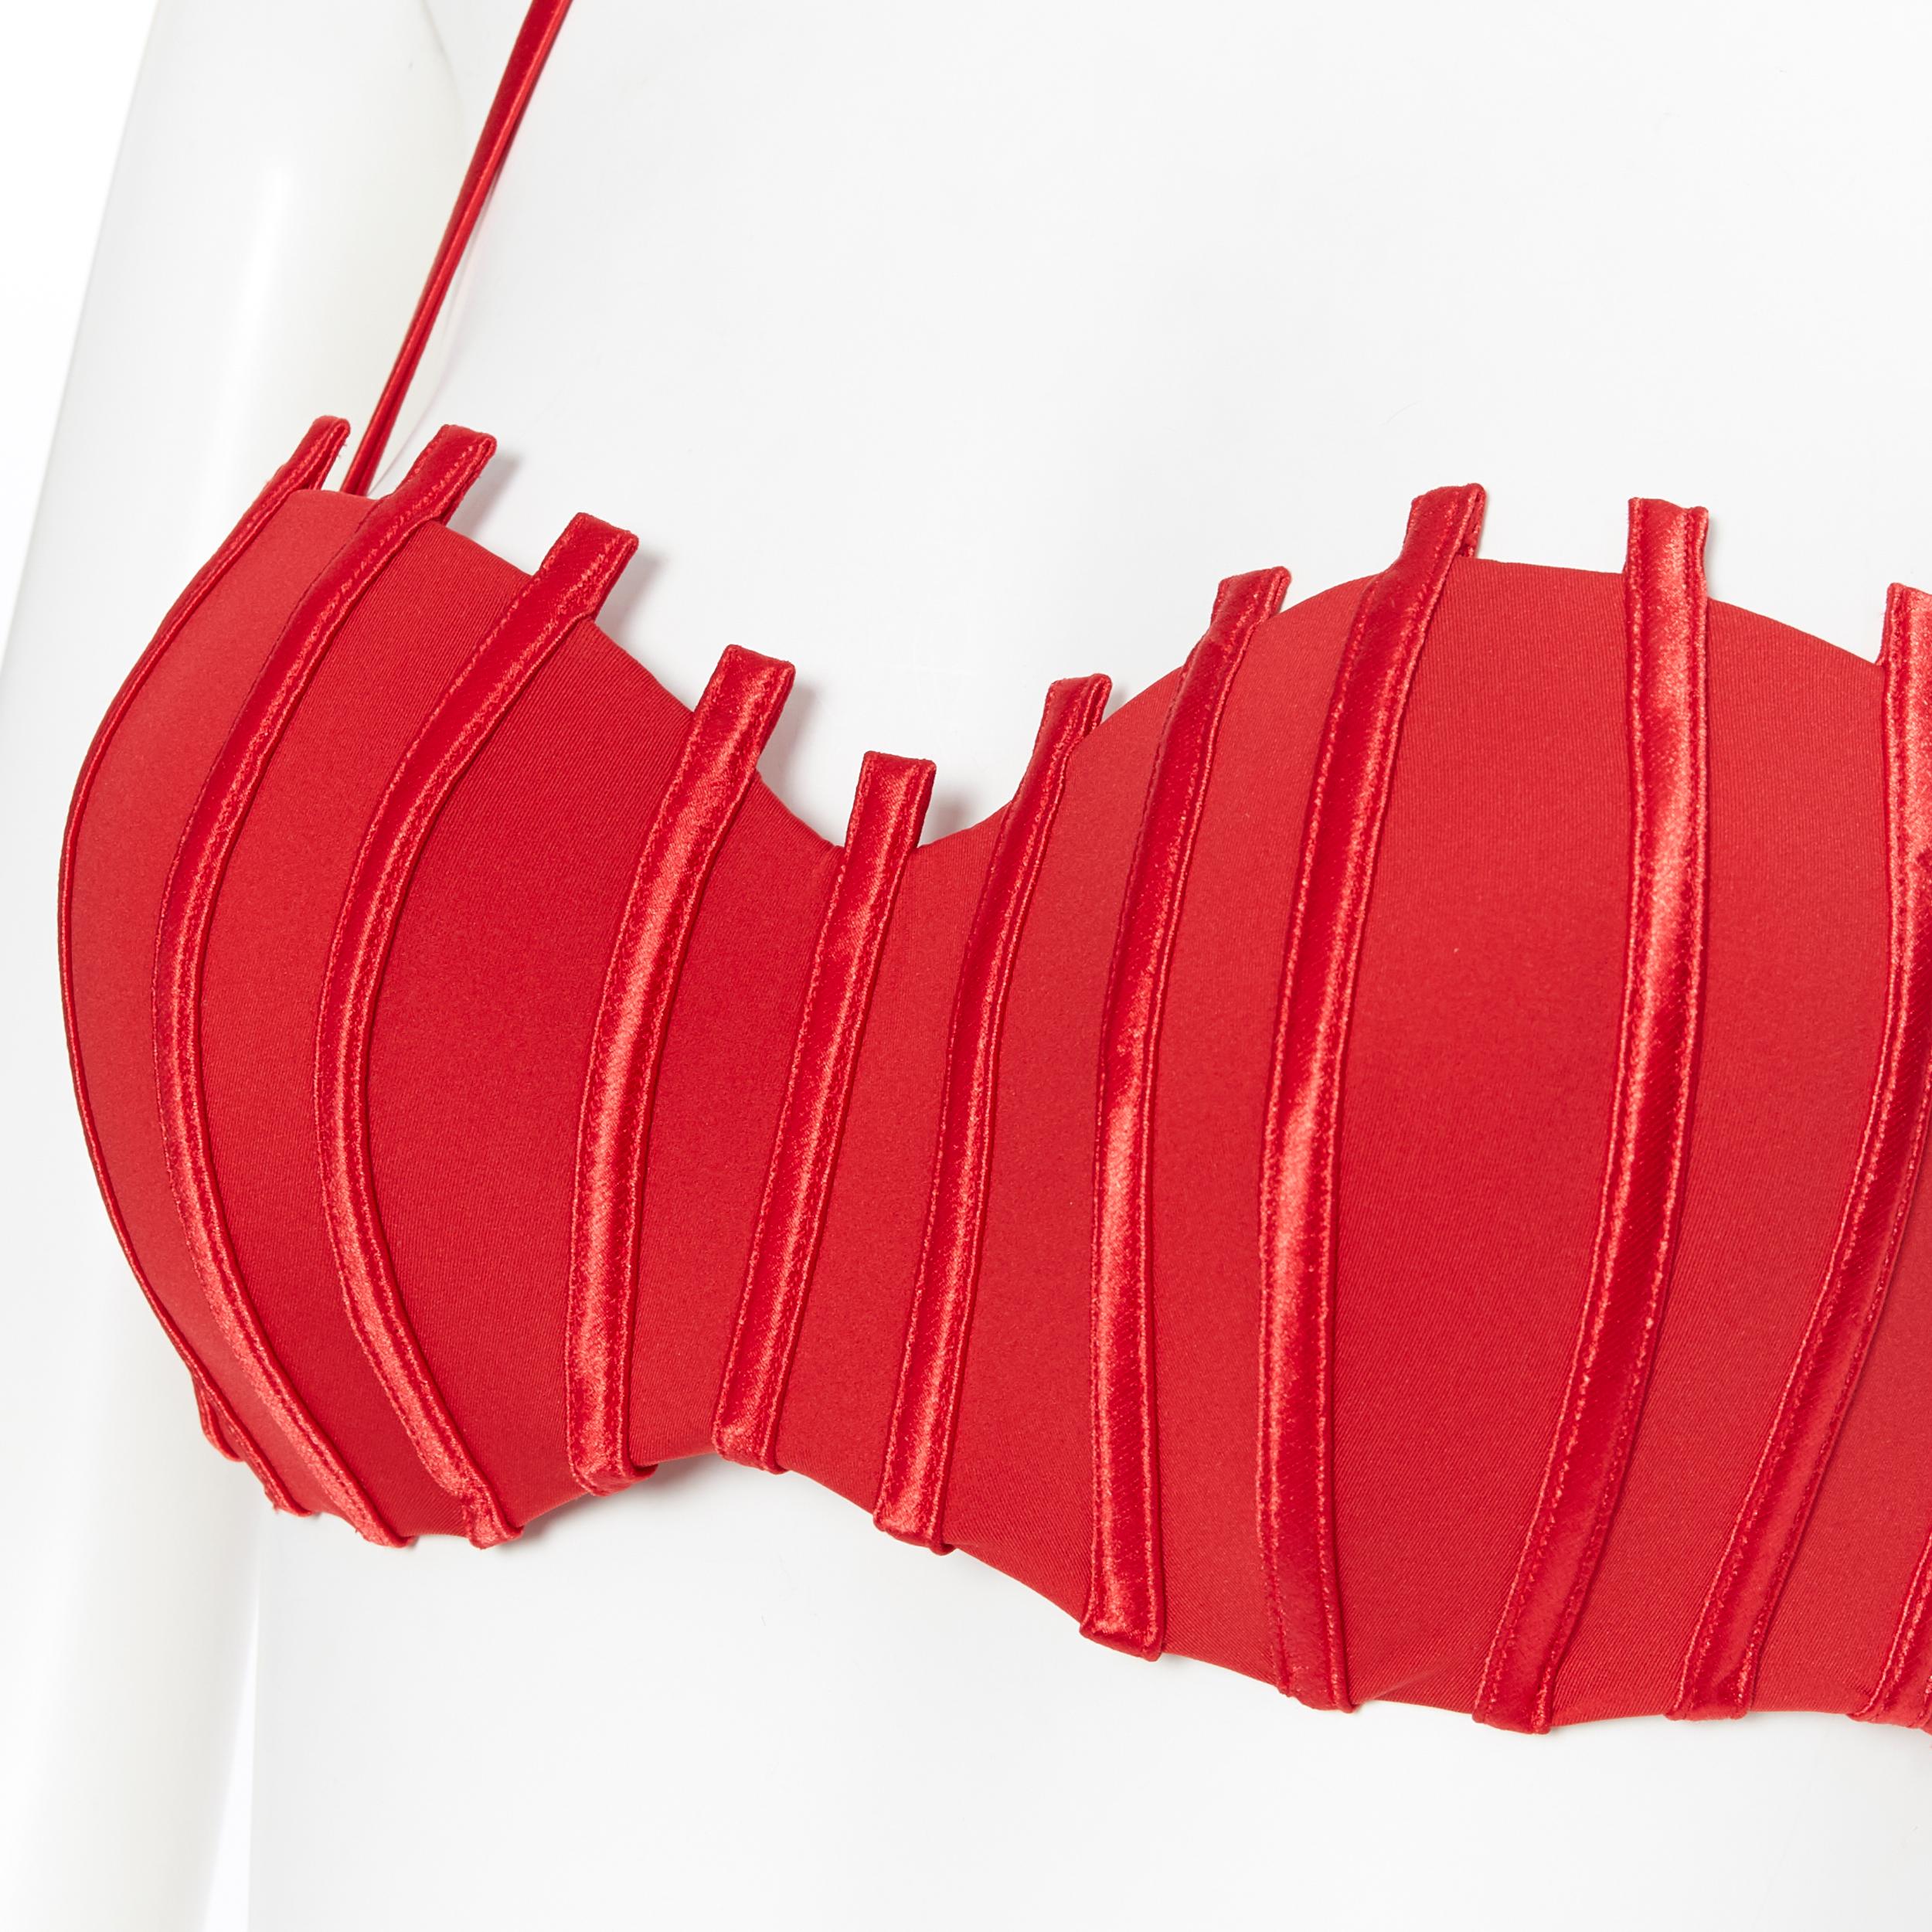 new LA PERLA Graphique Couture red boned sheer body 2-pc bikini swimsuit IT44B M 
Reference: TGAS/A03830 
Brand: La Perla 
Material: Polyamide 
Color: Red 
Pattern: Solid 
Closure: Buckle 
Extra Detail: Graphic Couture bikini. Red. Corset boning